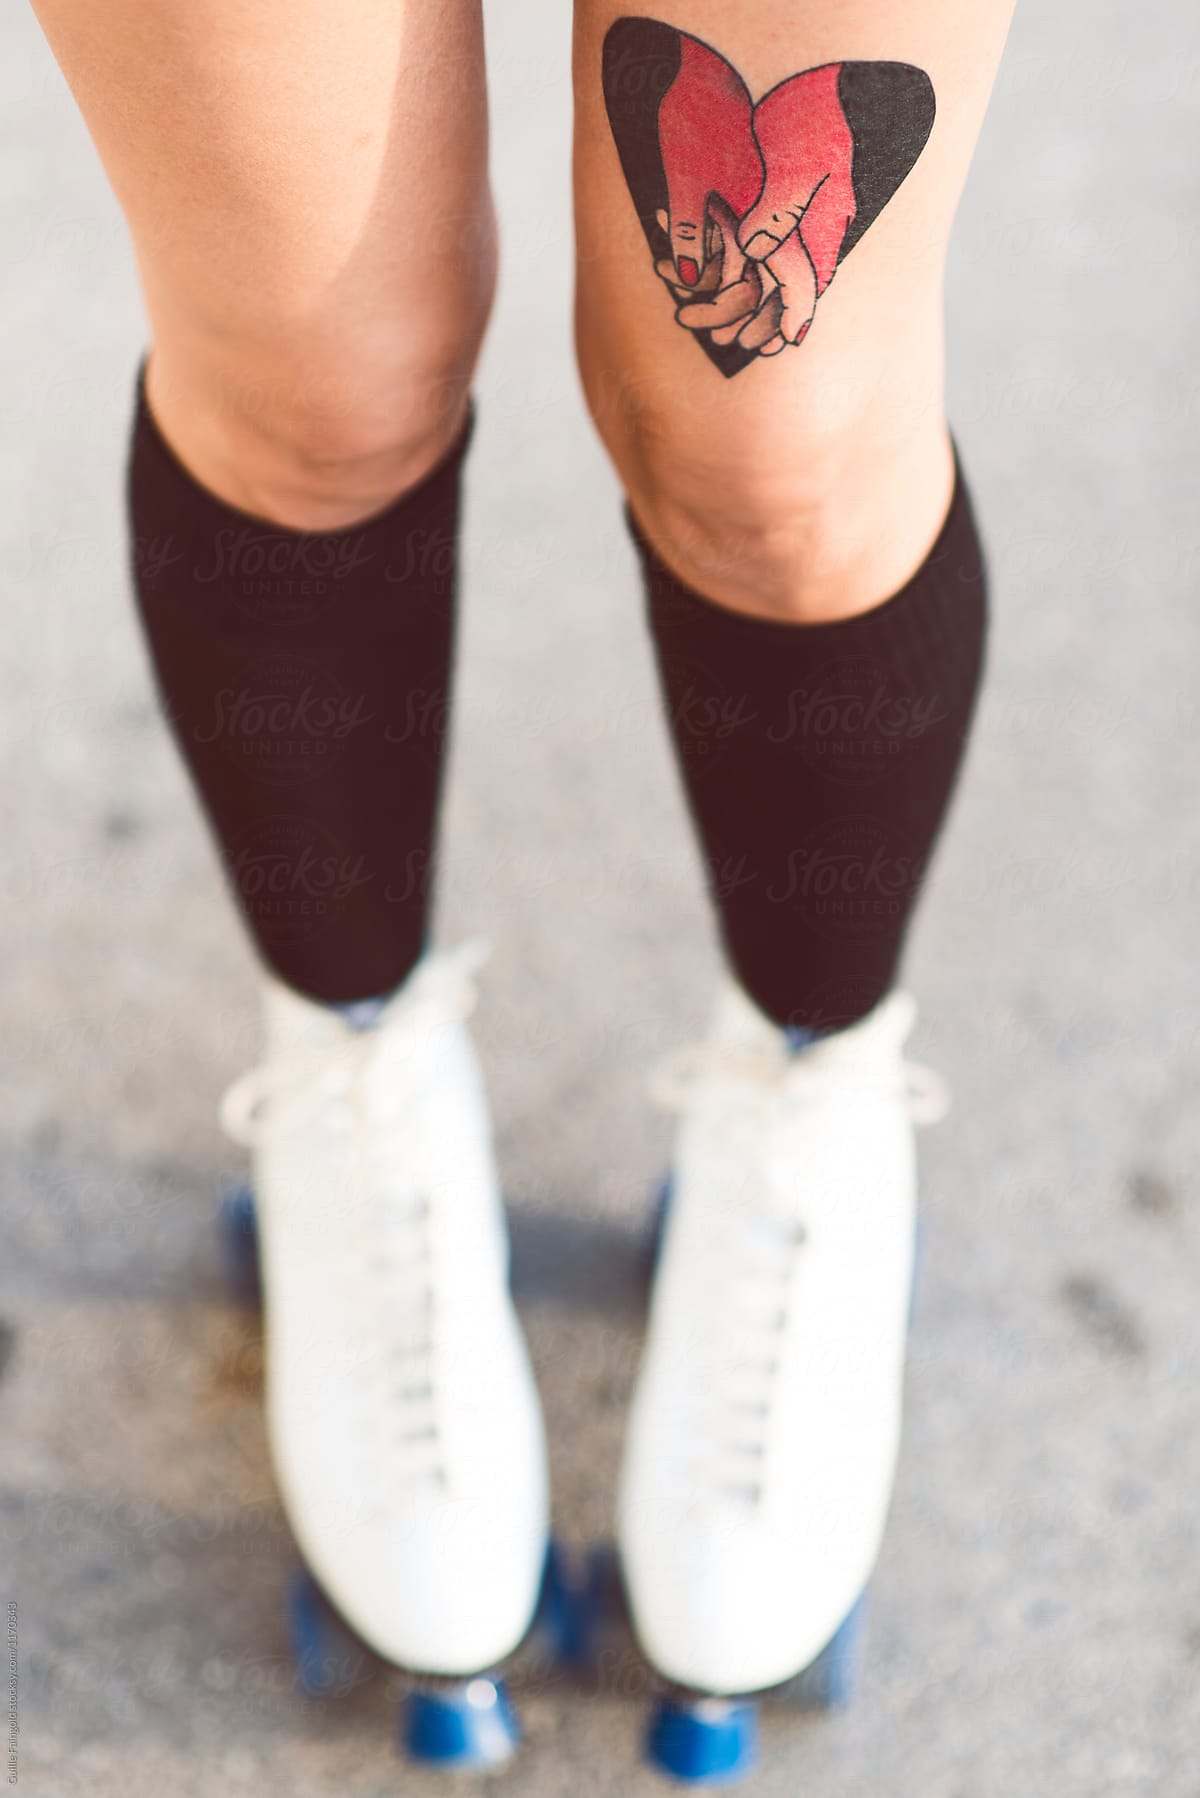 Girl with tattoo in rollerblades.